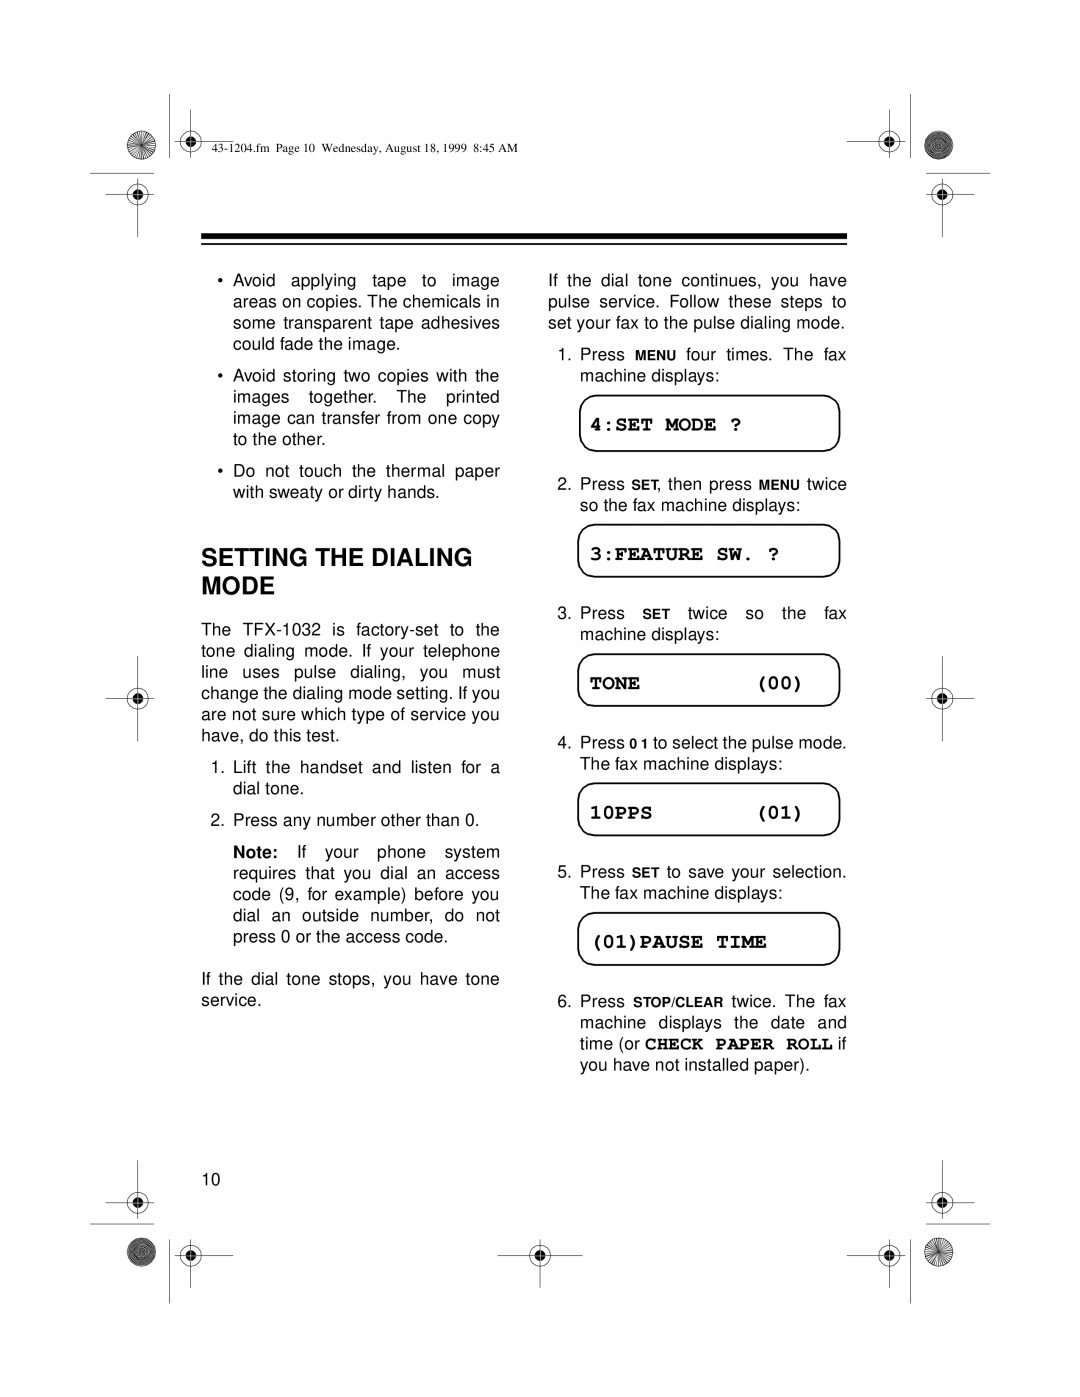 Radio Shack 43-1204 owner manual Setting The Dialing Mode, 4SET MODE ?, 3FEATURE SW. ?, Tone, 10PPS, 01PAUSE TIME 